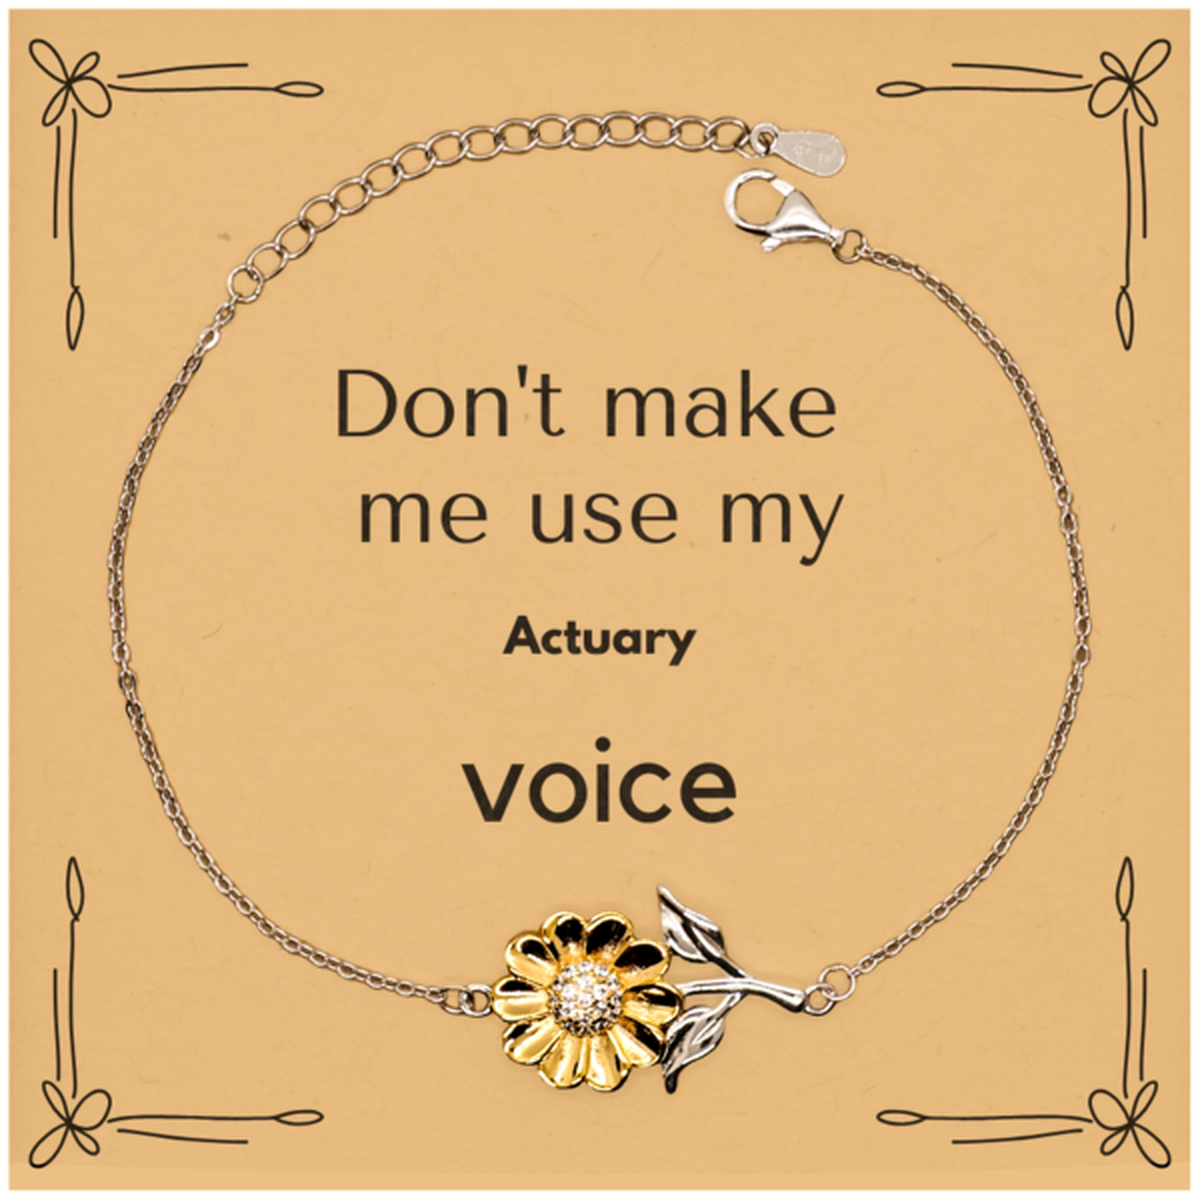 Don't make me use my Actuary voice, Sarcasm Actuary Card Gifts, Christmas Actuary Sunflower Bracelet Birthday Unique Gifts For Actuary Coworkers, Men, Women, Colleague, Friends